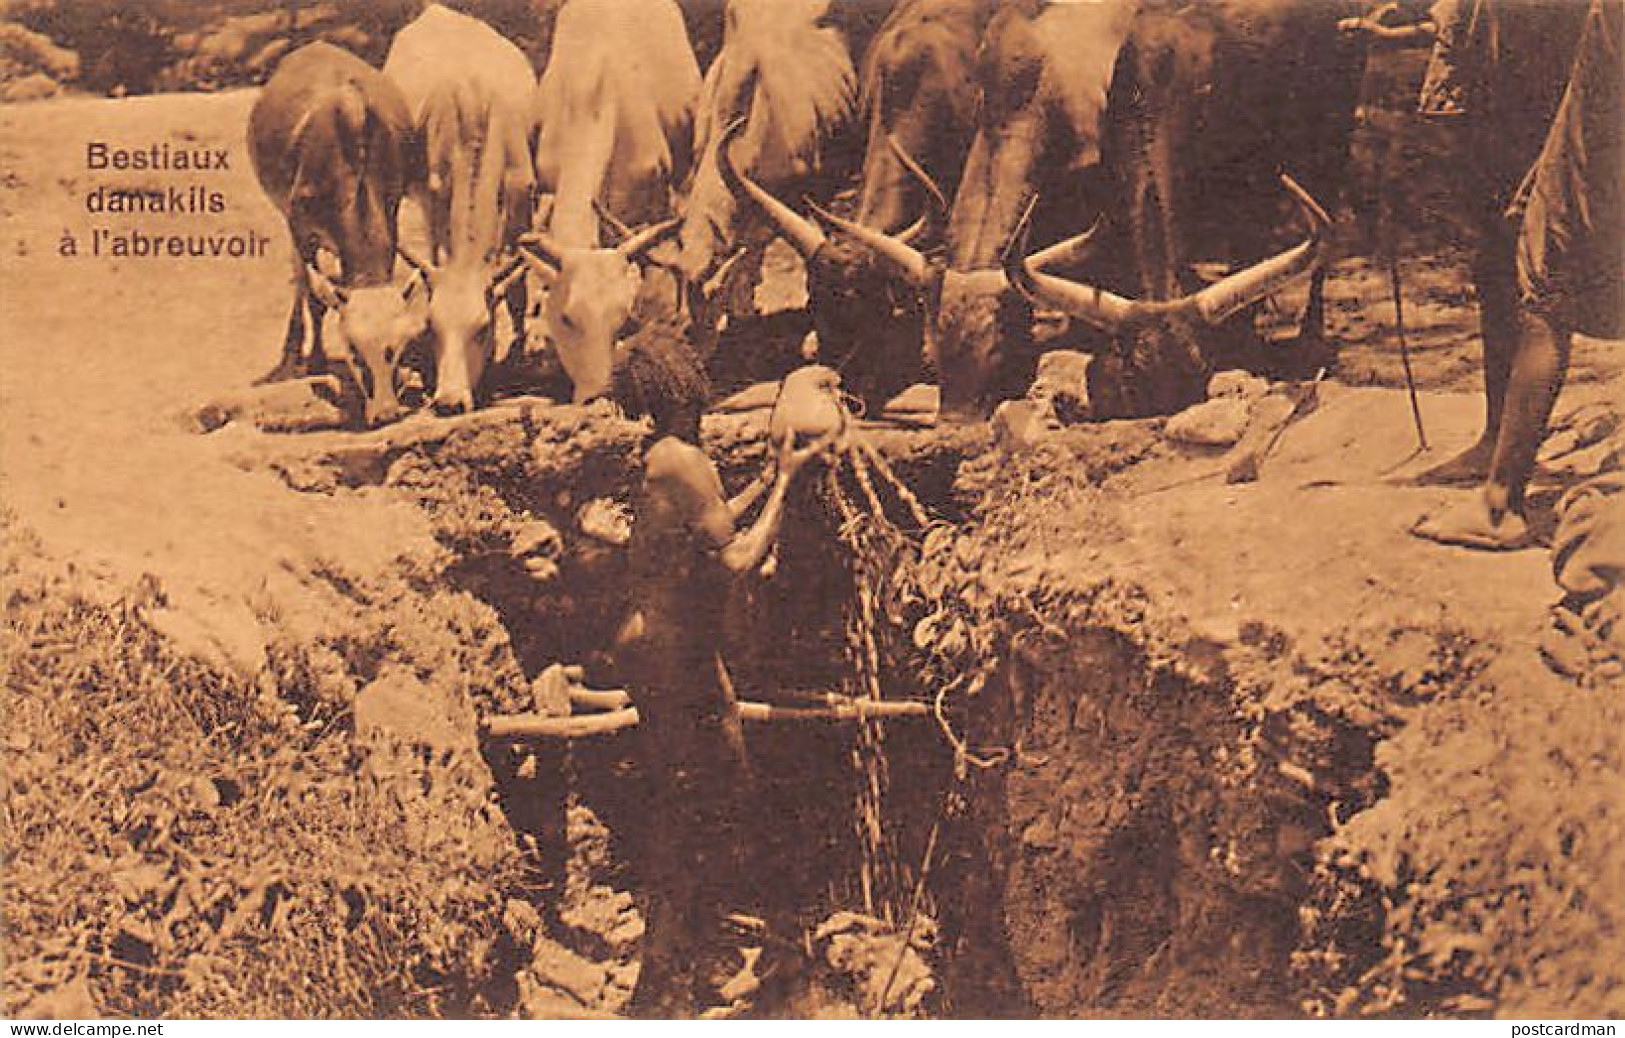 Ethiopia - Dankali Cattle At The Watering Hole - Publ. J. A. Michel 6883 - Ethiopia